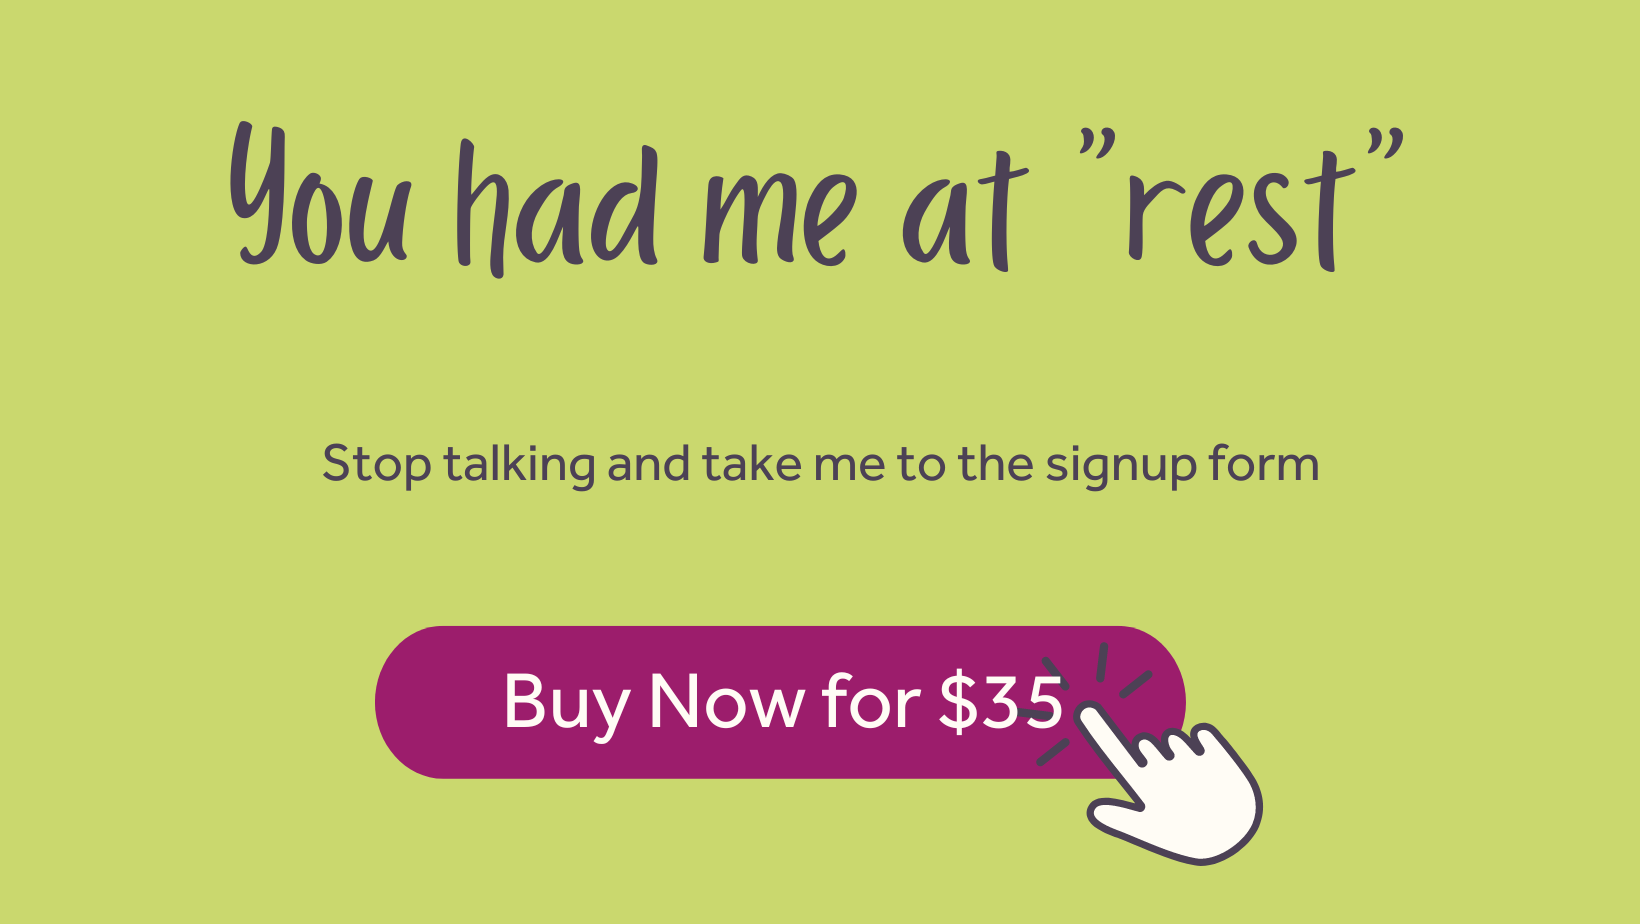 You had me at Rest. Buy now for $35 button